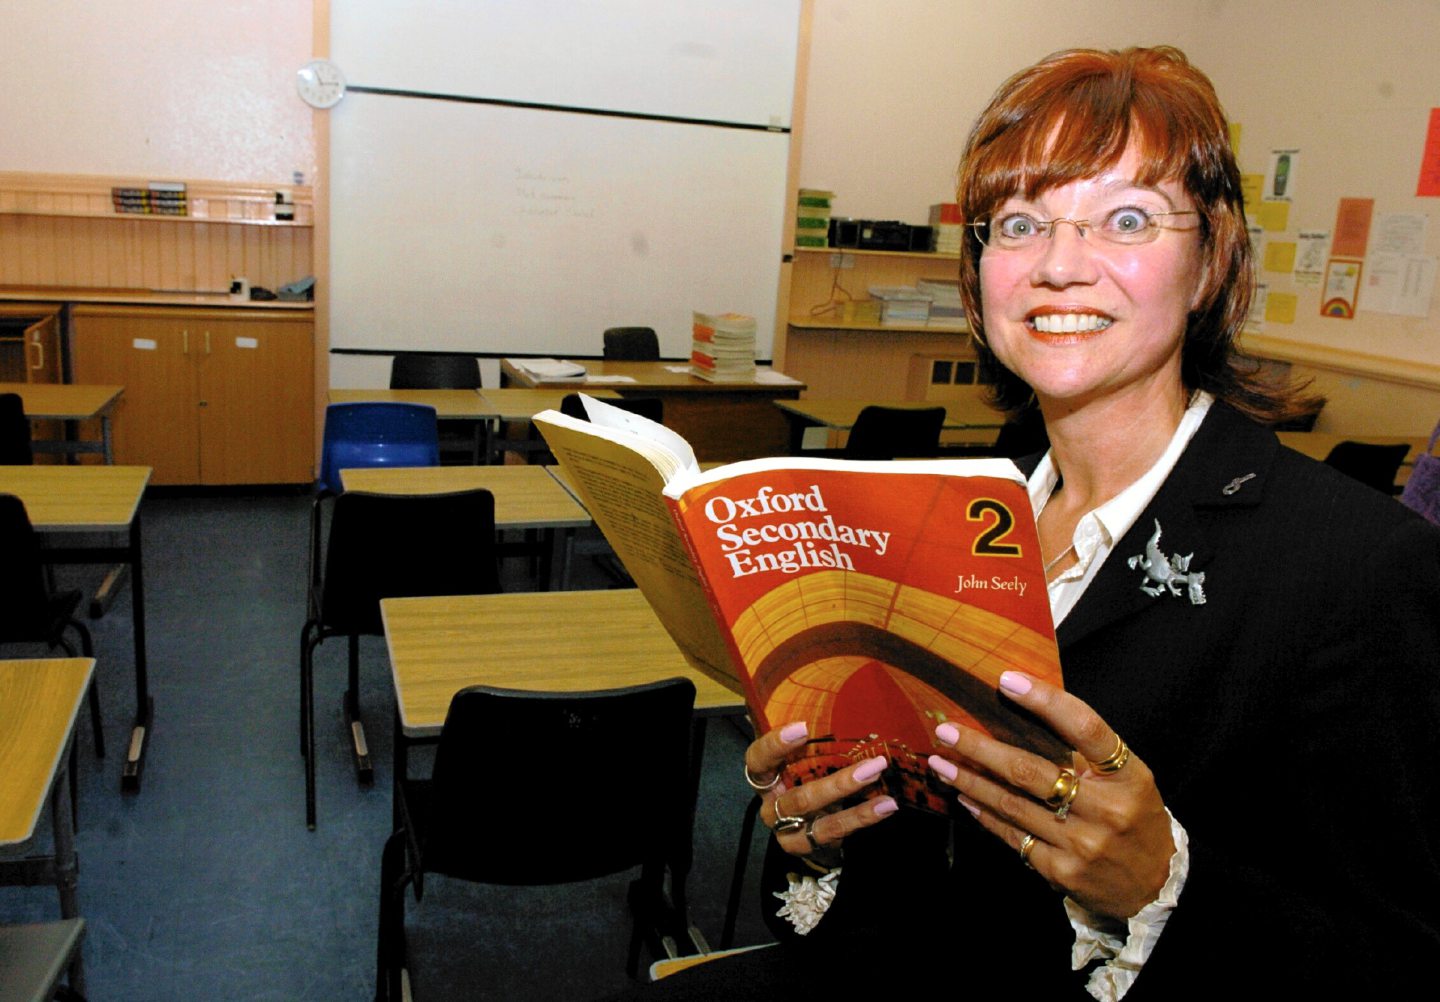 A teachers in her classroom holding a textbook